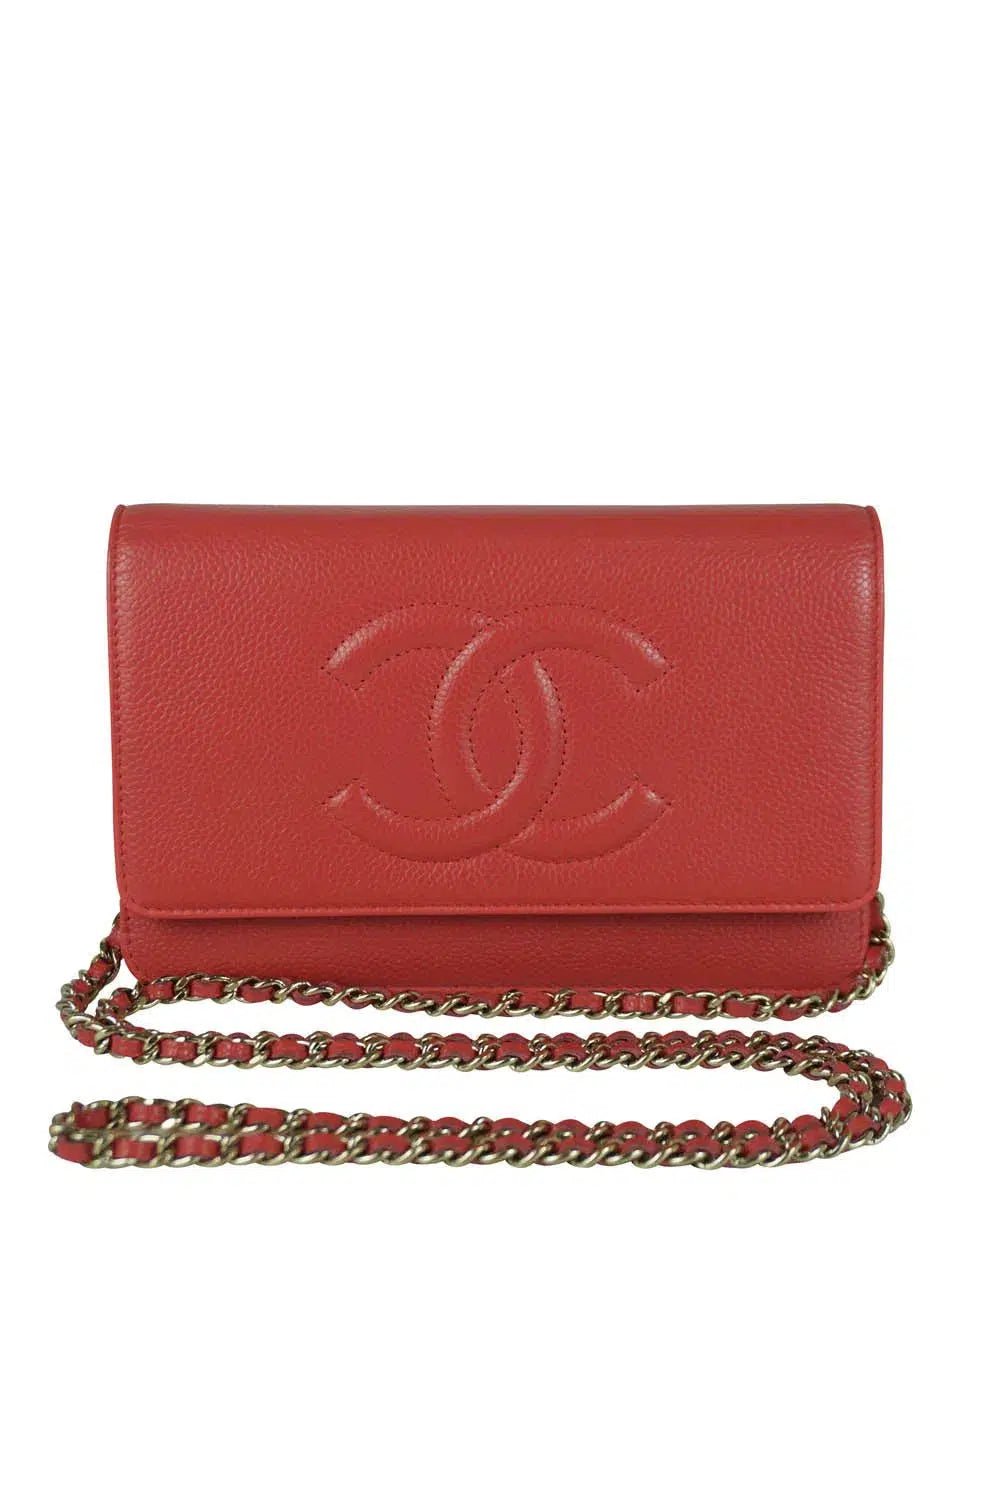 Chanel Caviar Salmon Timeless Wallet on a Chain 2014-15 - Foxy Couture Carmel